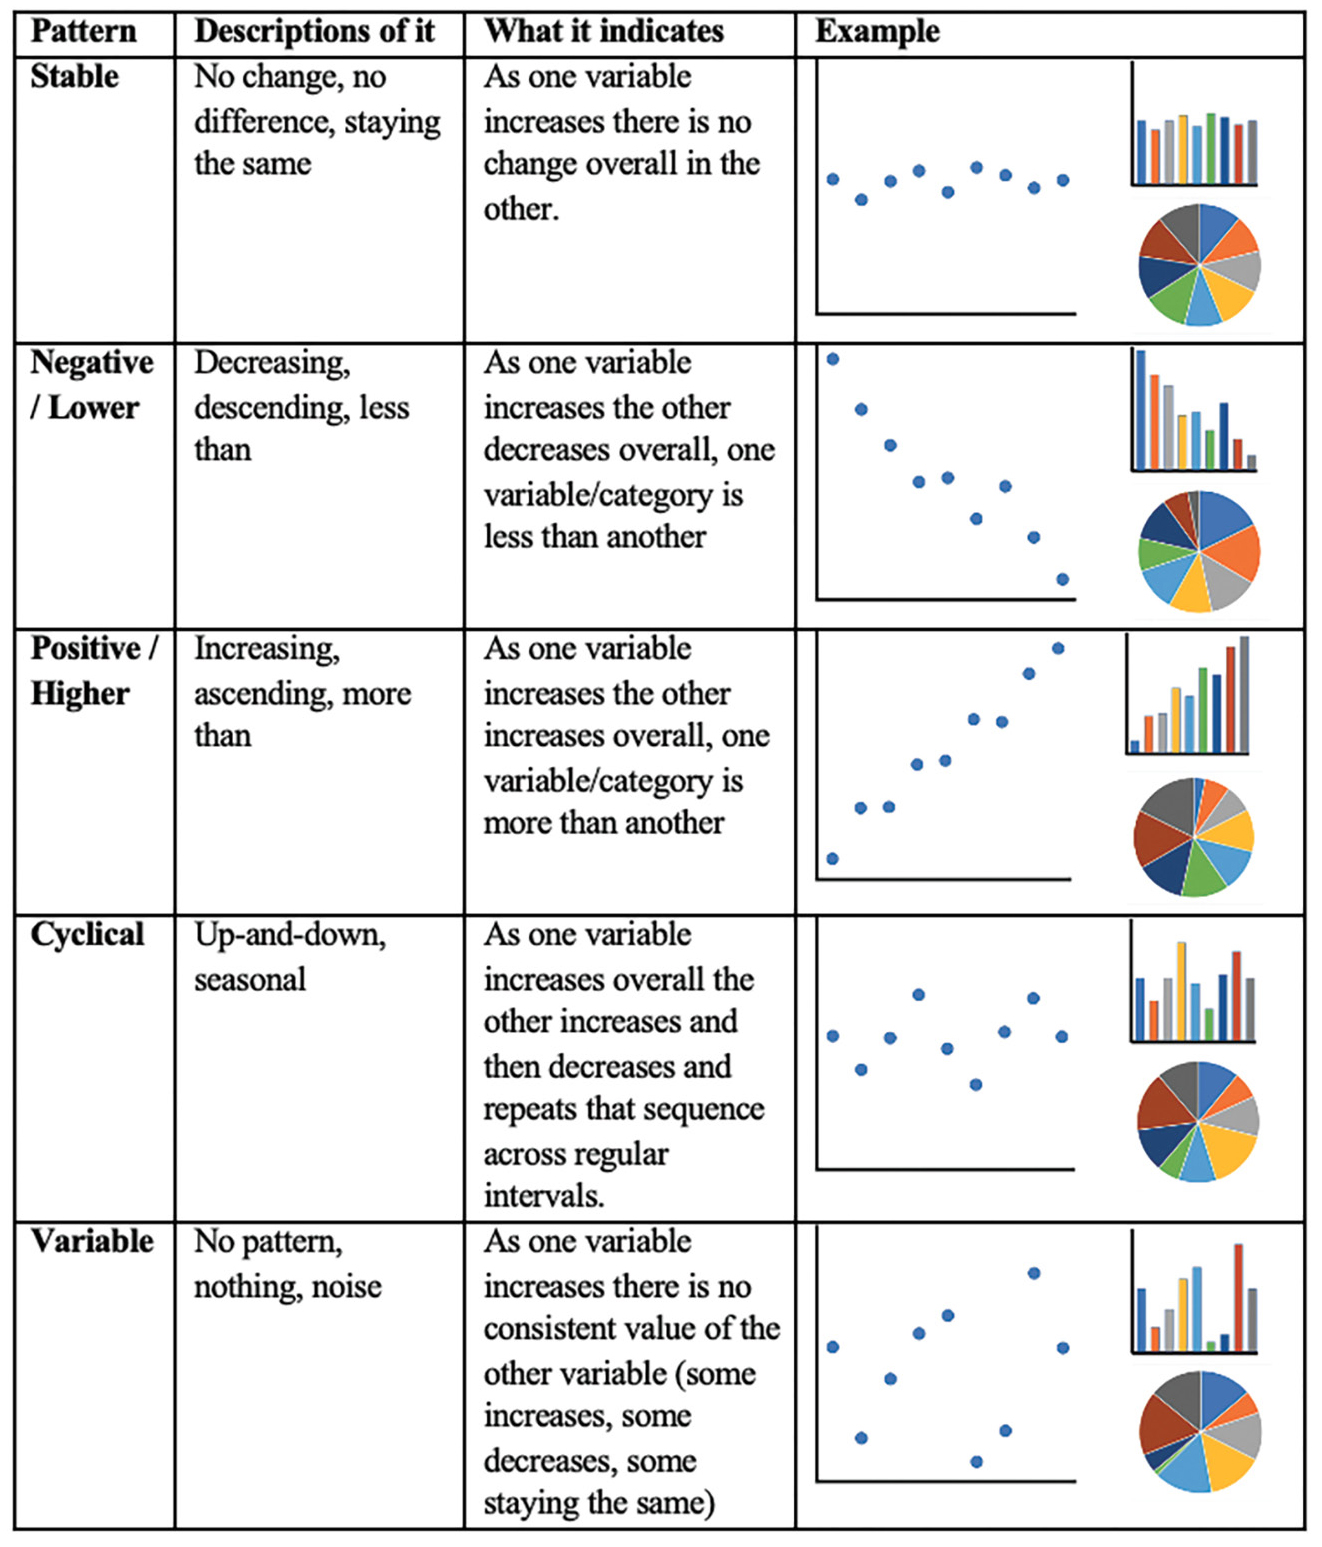 Figure 1 Description of five common data patterns observed in middle school science classrooms.